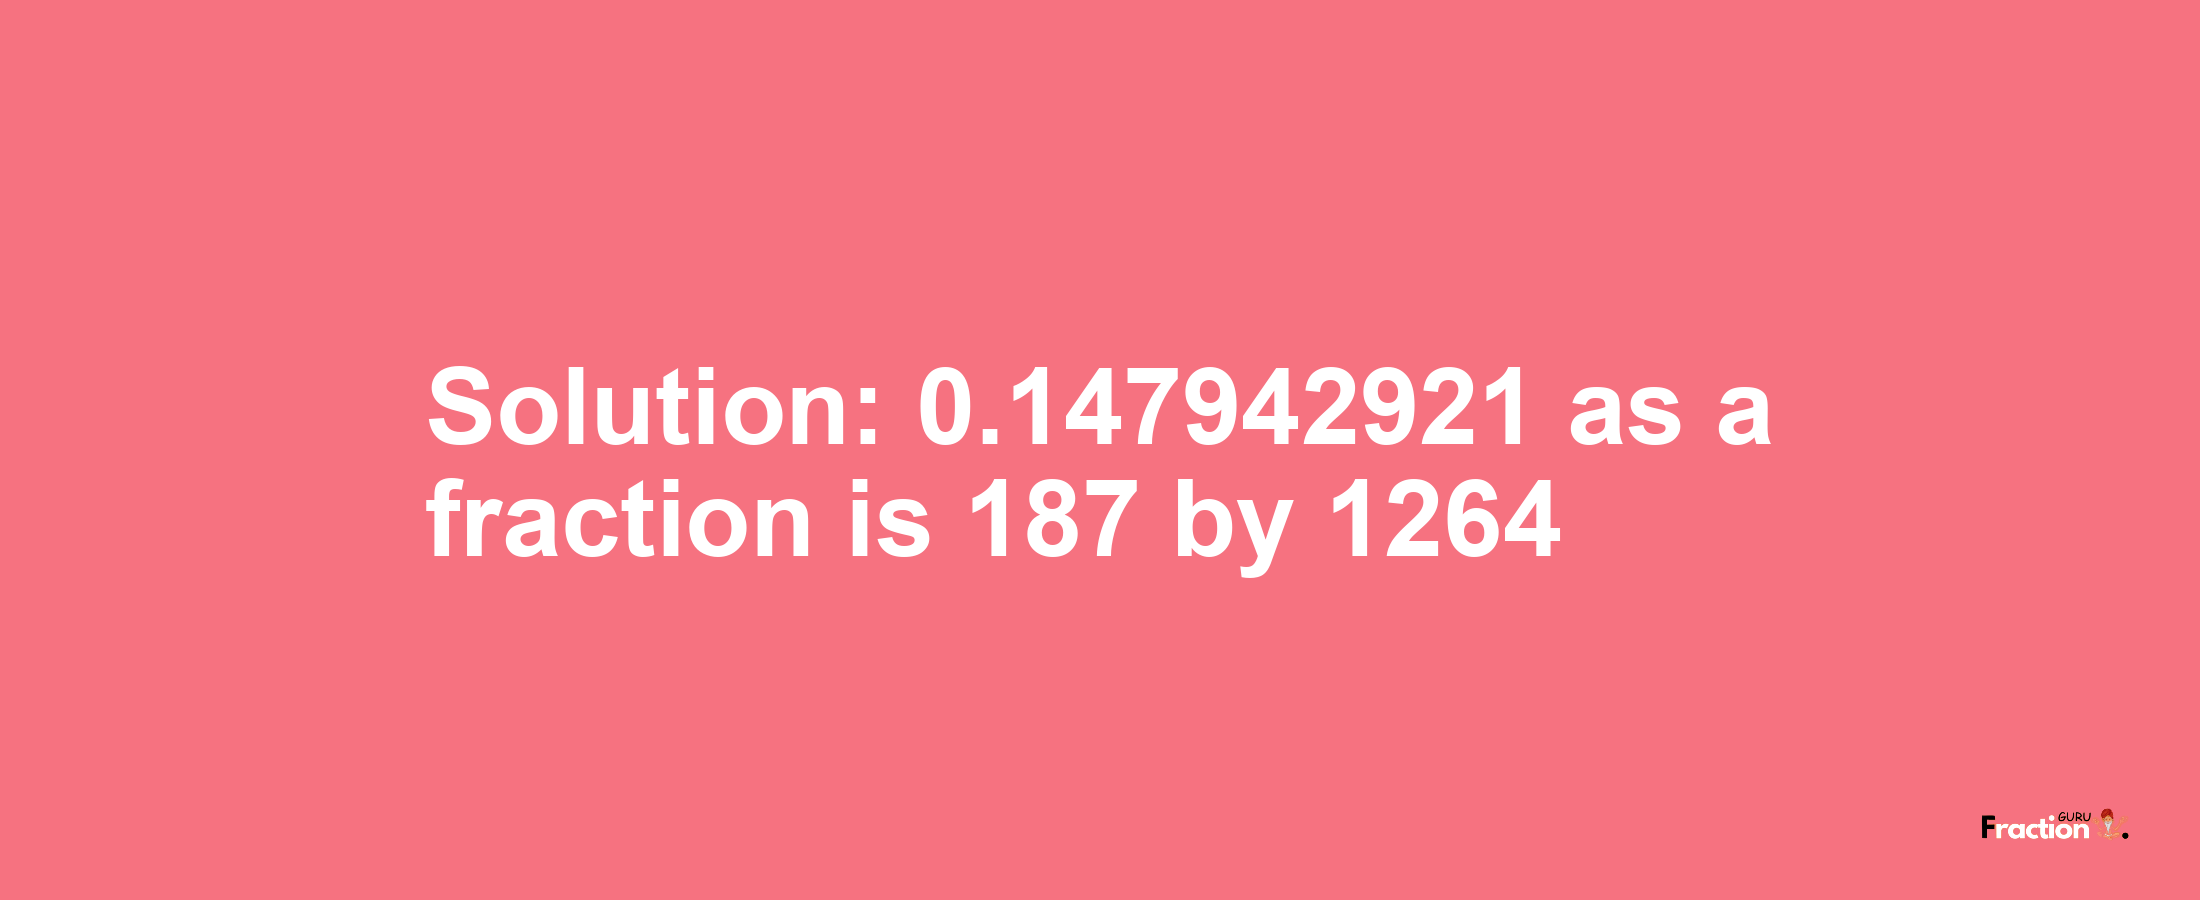 Solution:0.147942921 as a fraction is 187/1264